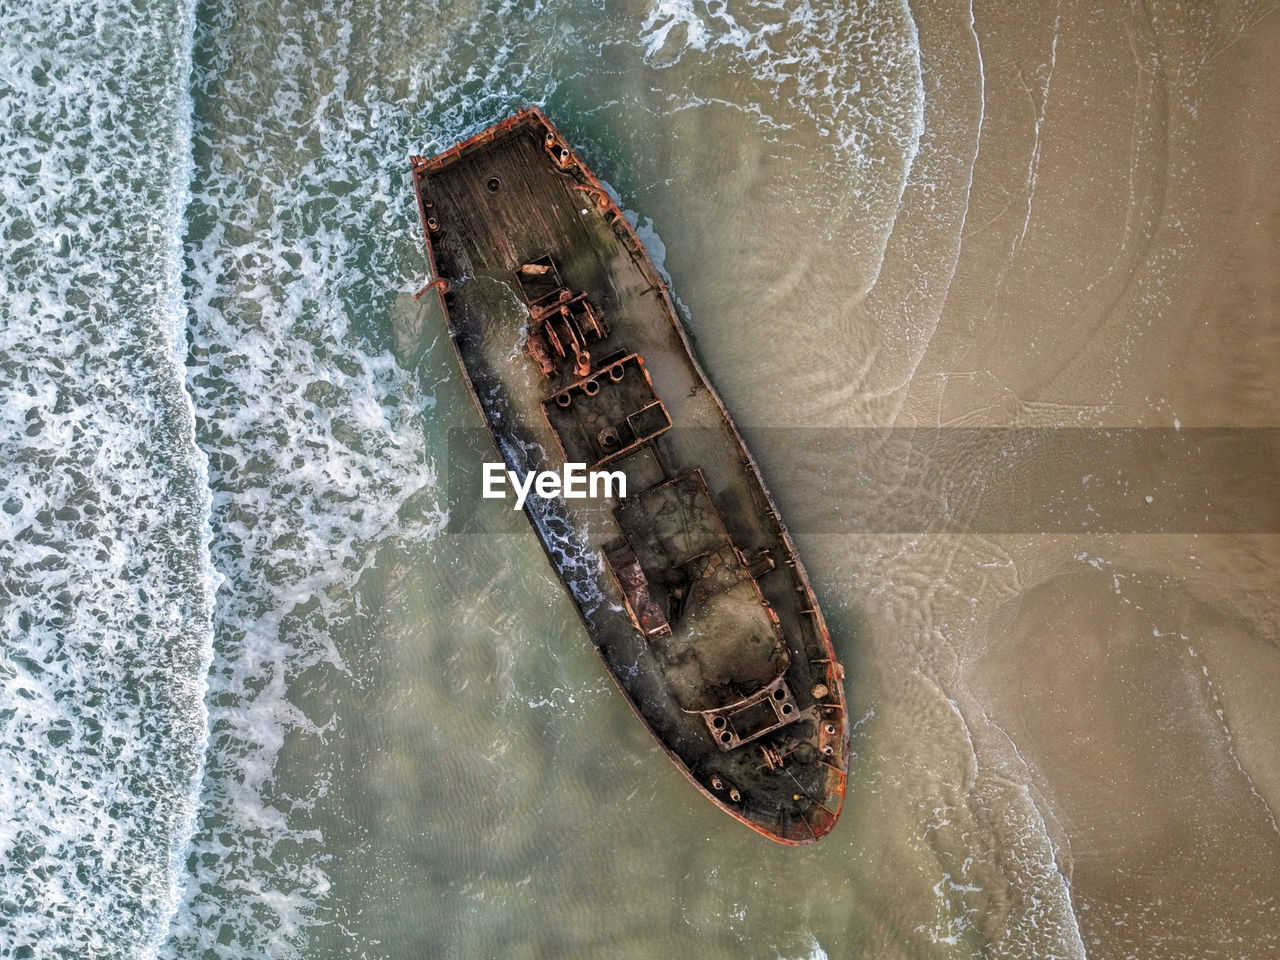 Wrecked boat from above